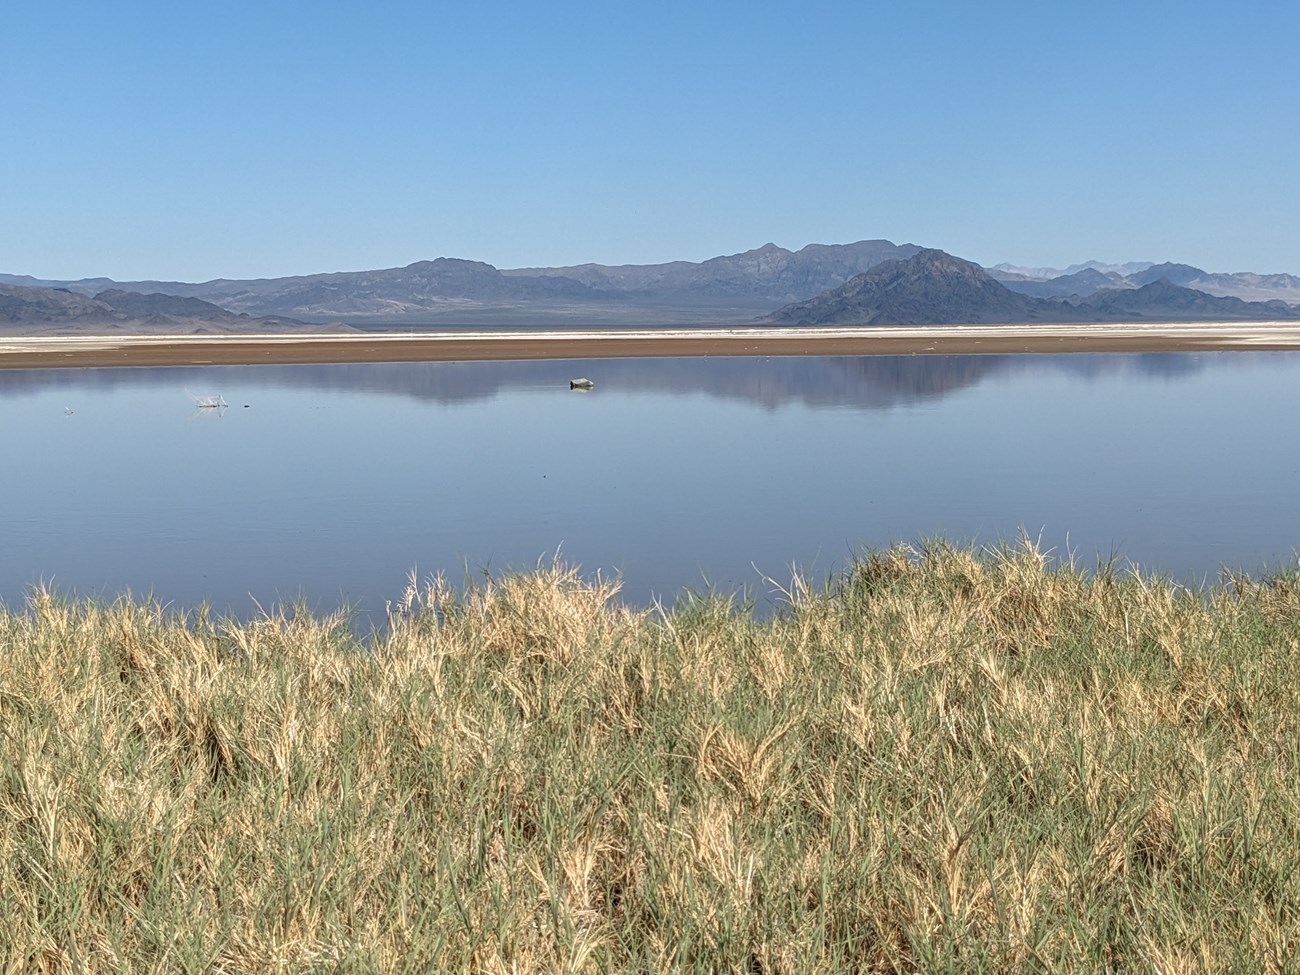 An expanse of shallow water is a temporary lake in the Mojave Desert, reflecting mountains on the opposite lakeshore..